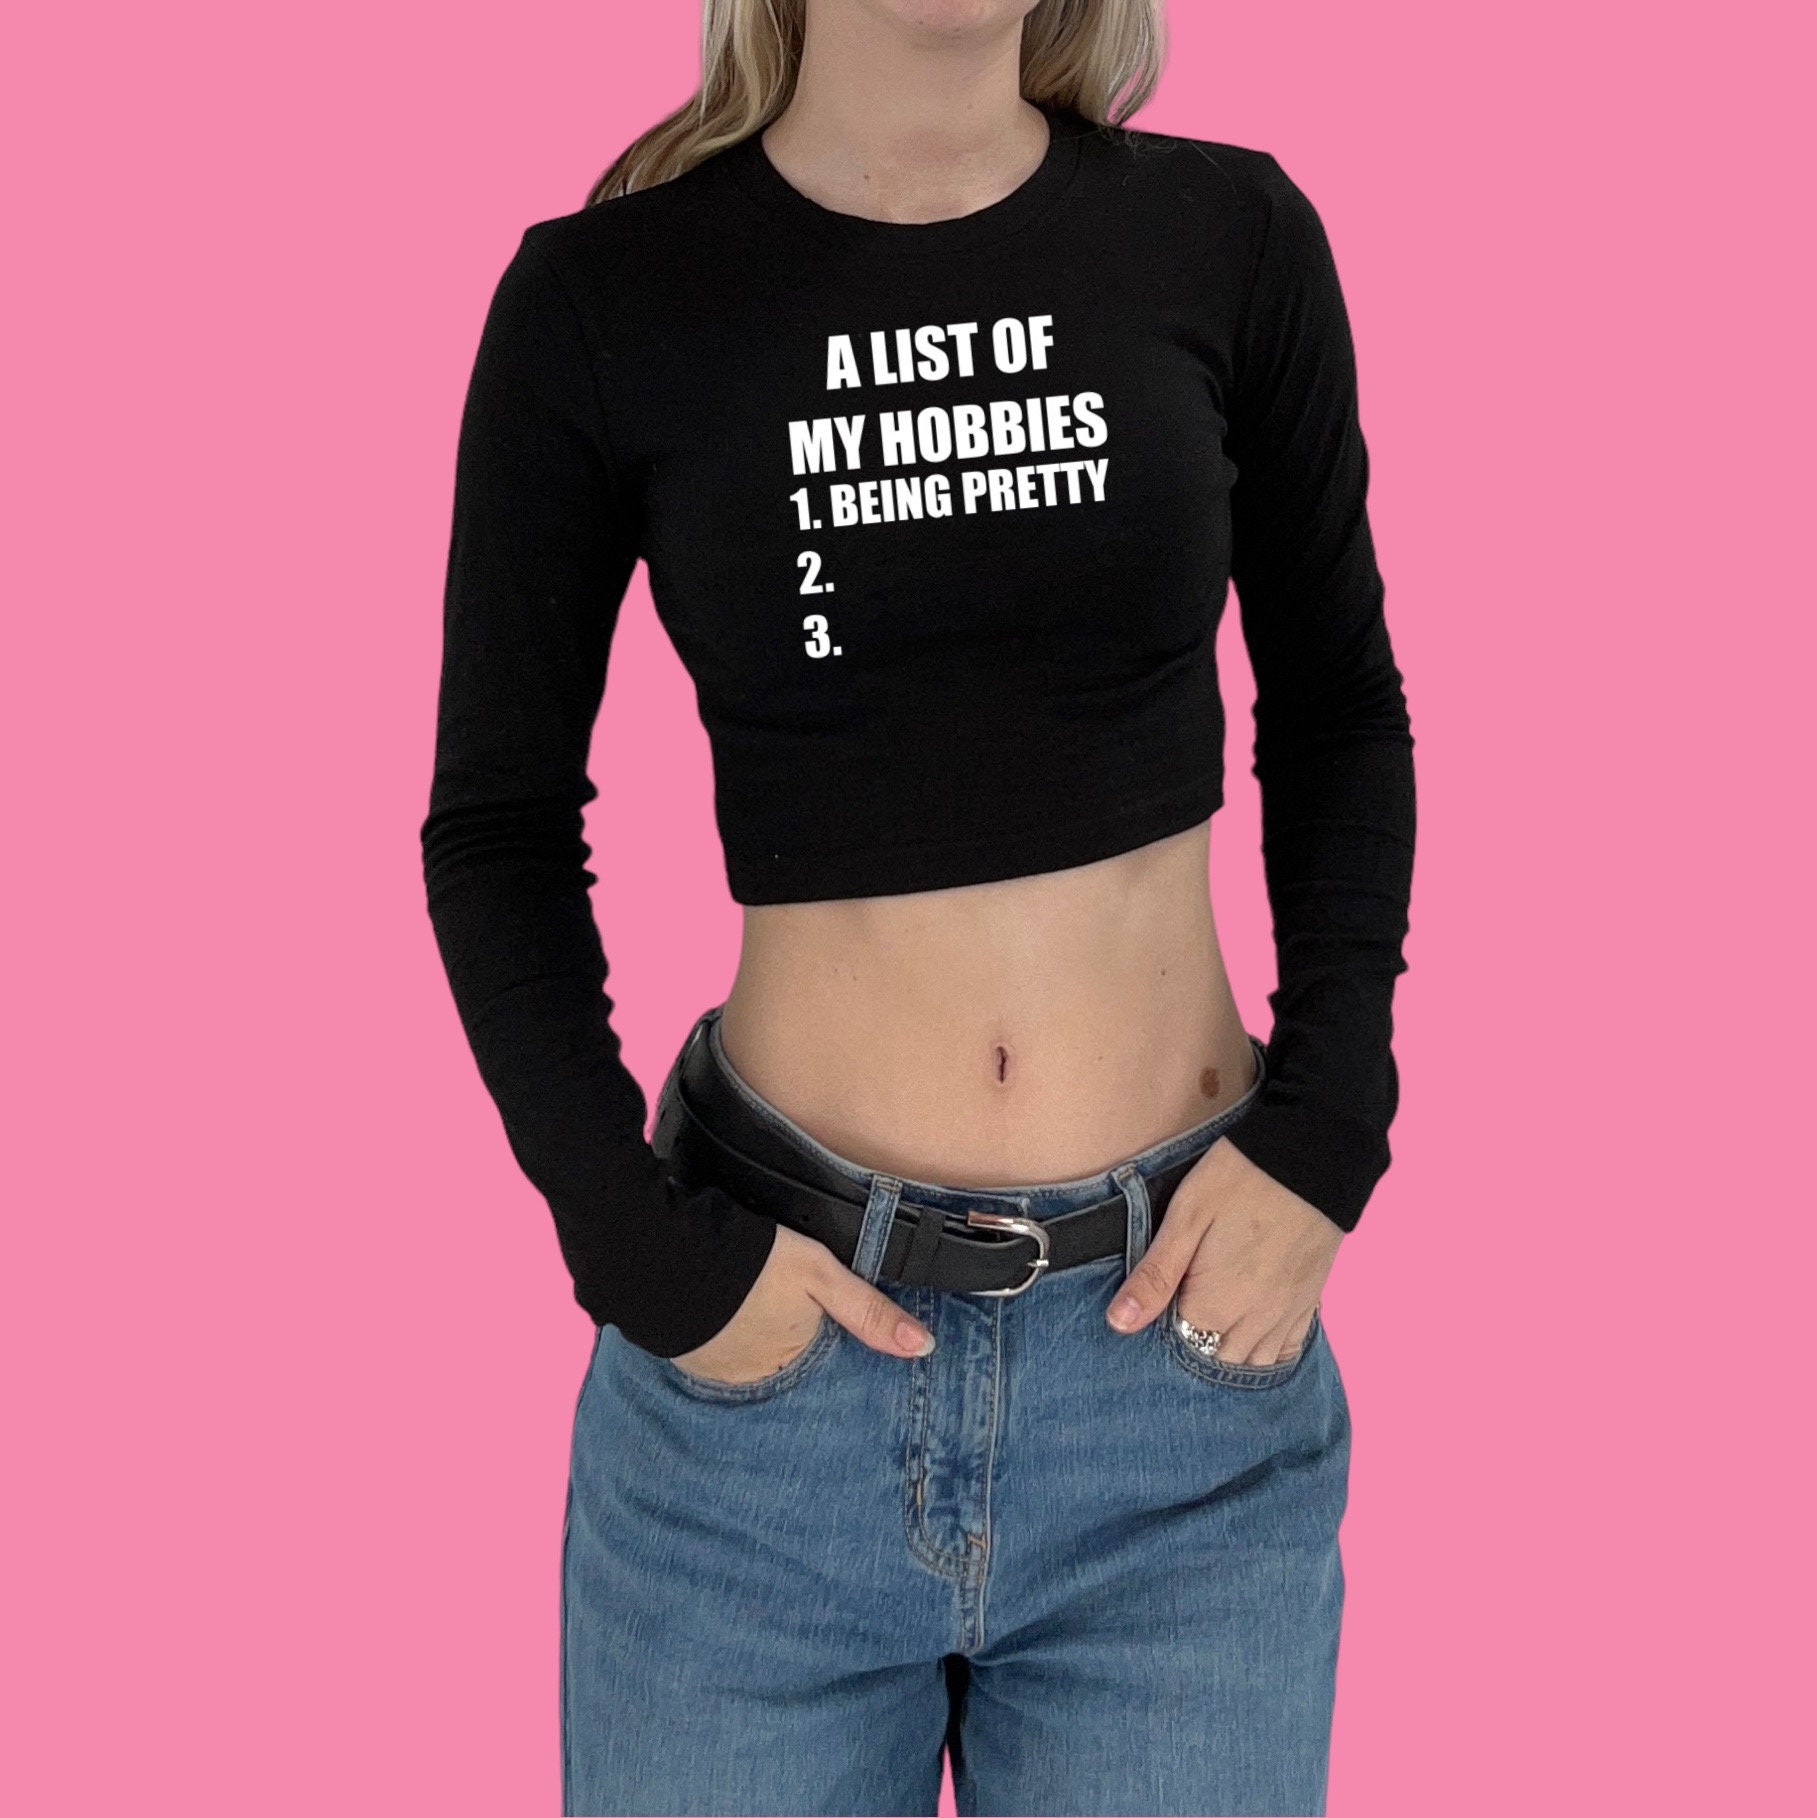 Vintage-Inspired Y2K Crop Top with Baby Tee and Long Sleeve